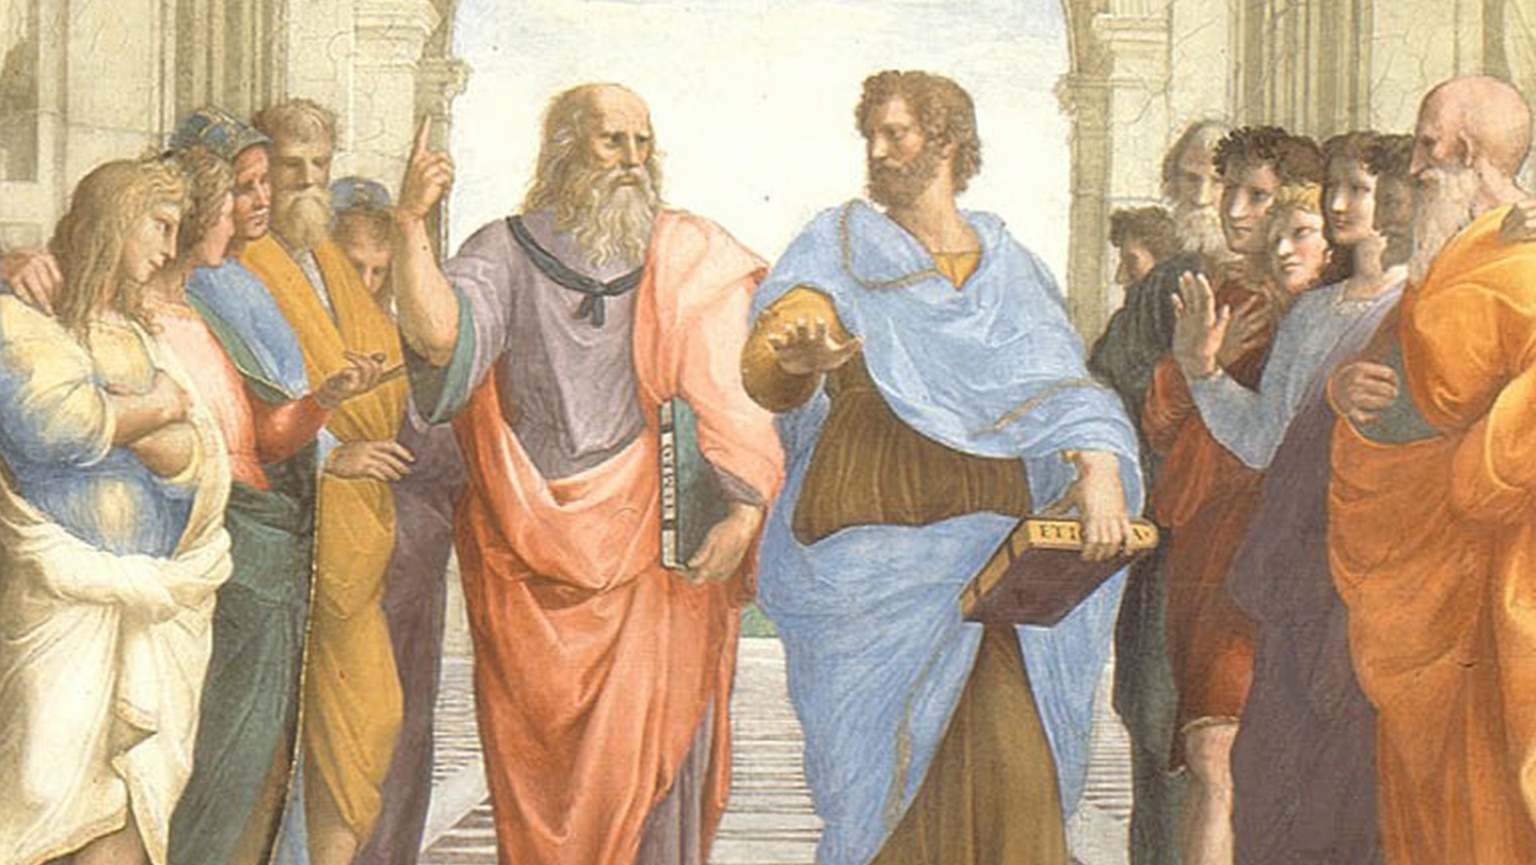 Aristotle and the politeia of the Carthaginians